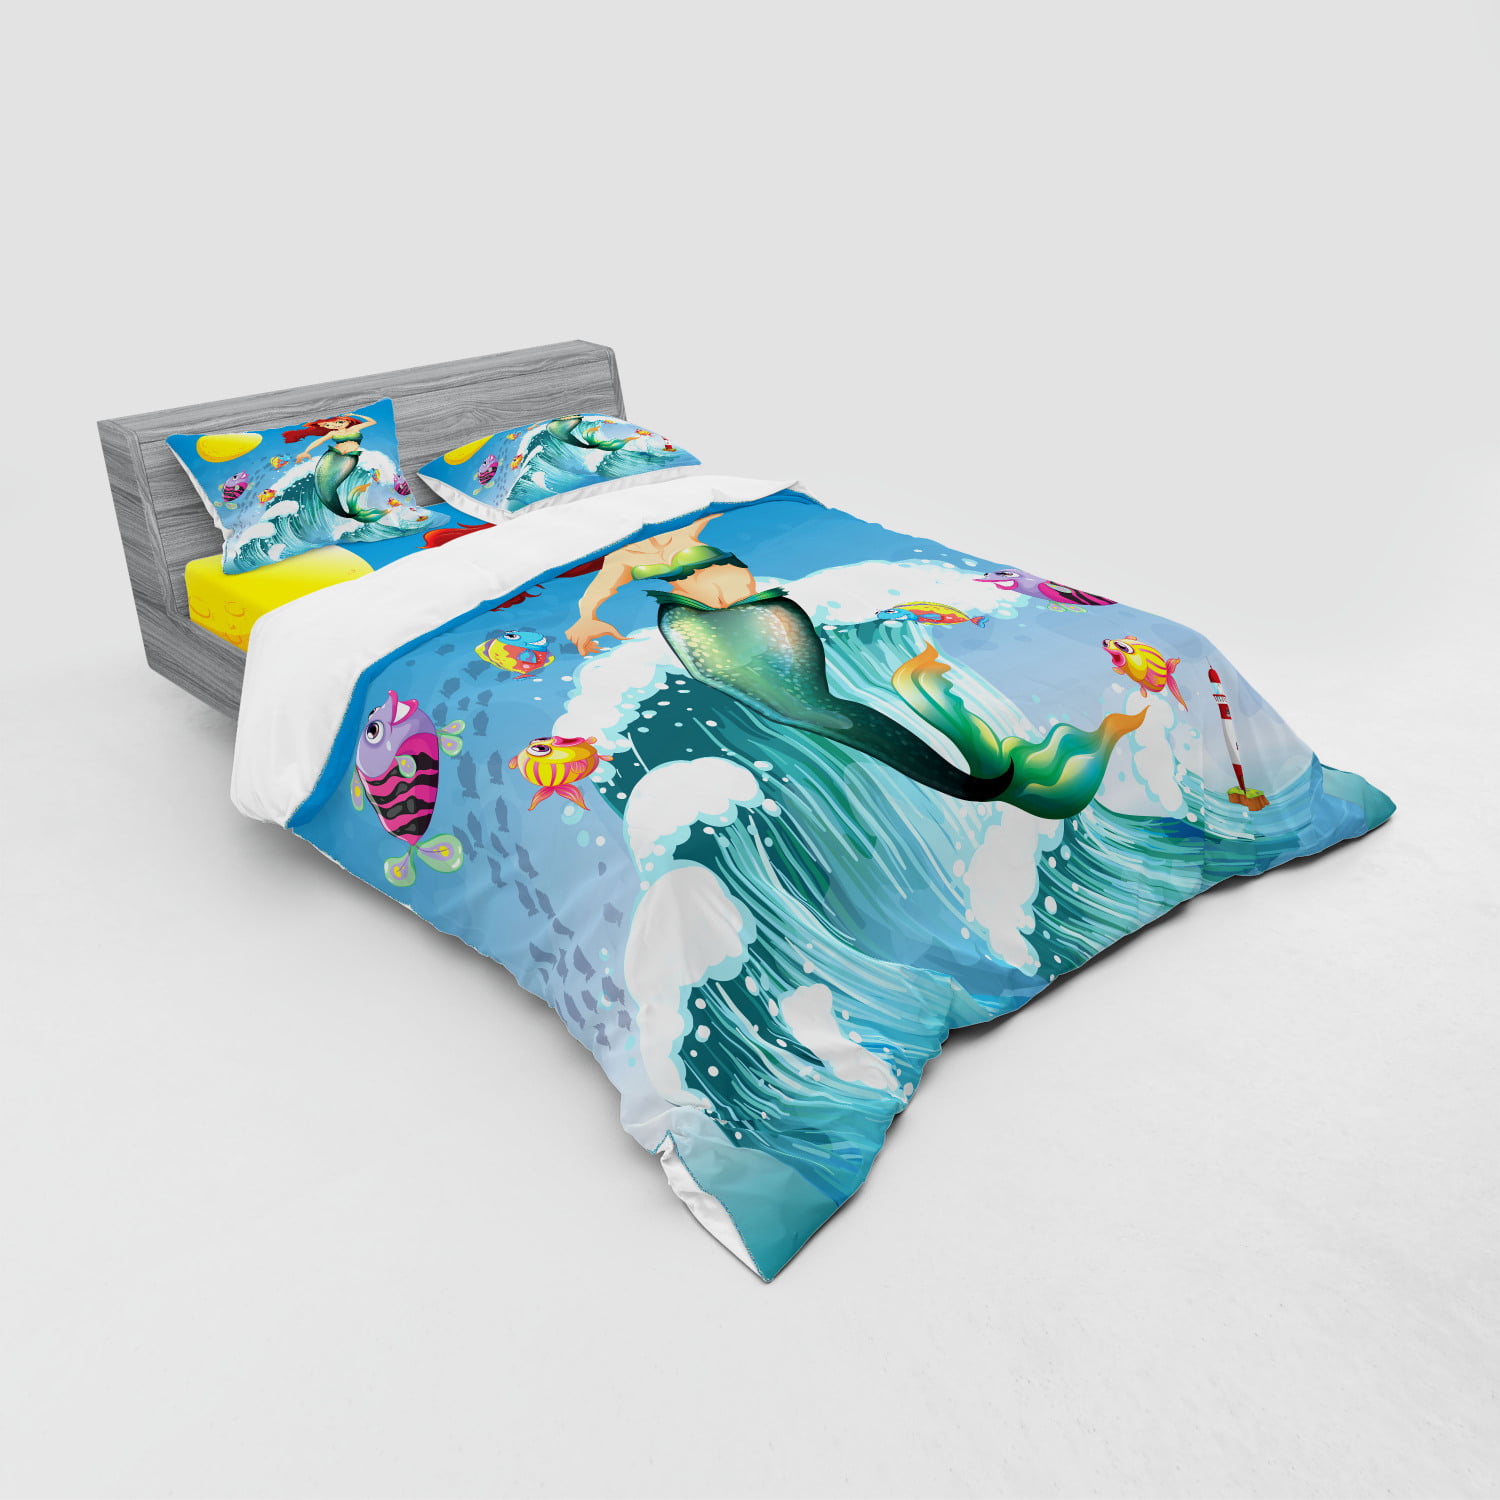 Twin Size Soft Comfortable Top Sheet Decorative Bedding 1 Piece Multicolor Illustration Little Girl on top of a Big Wave in The Surf Fish Kids Ambesonne Mermaid Flat Sheet